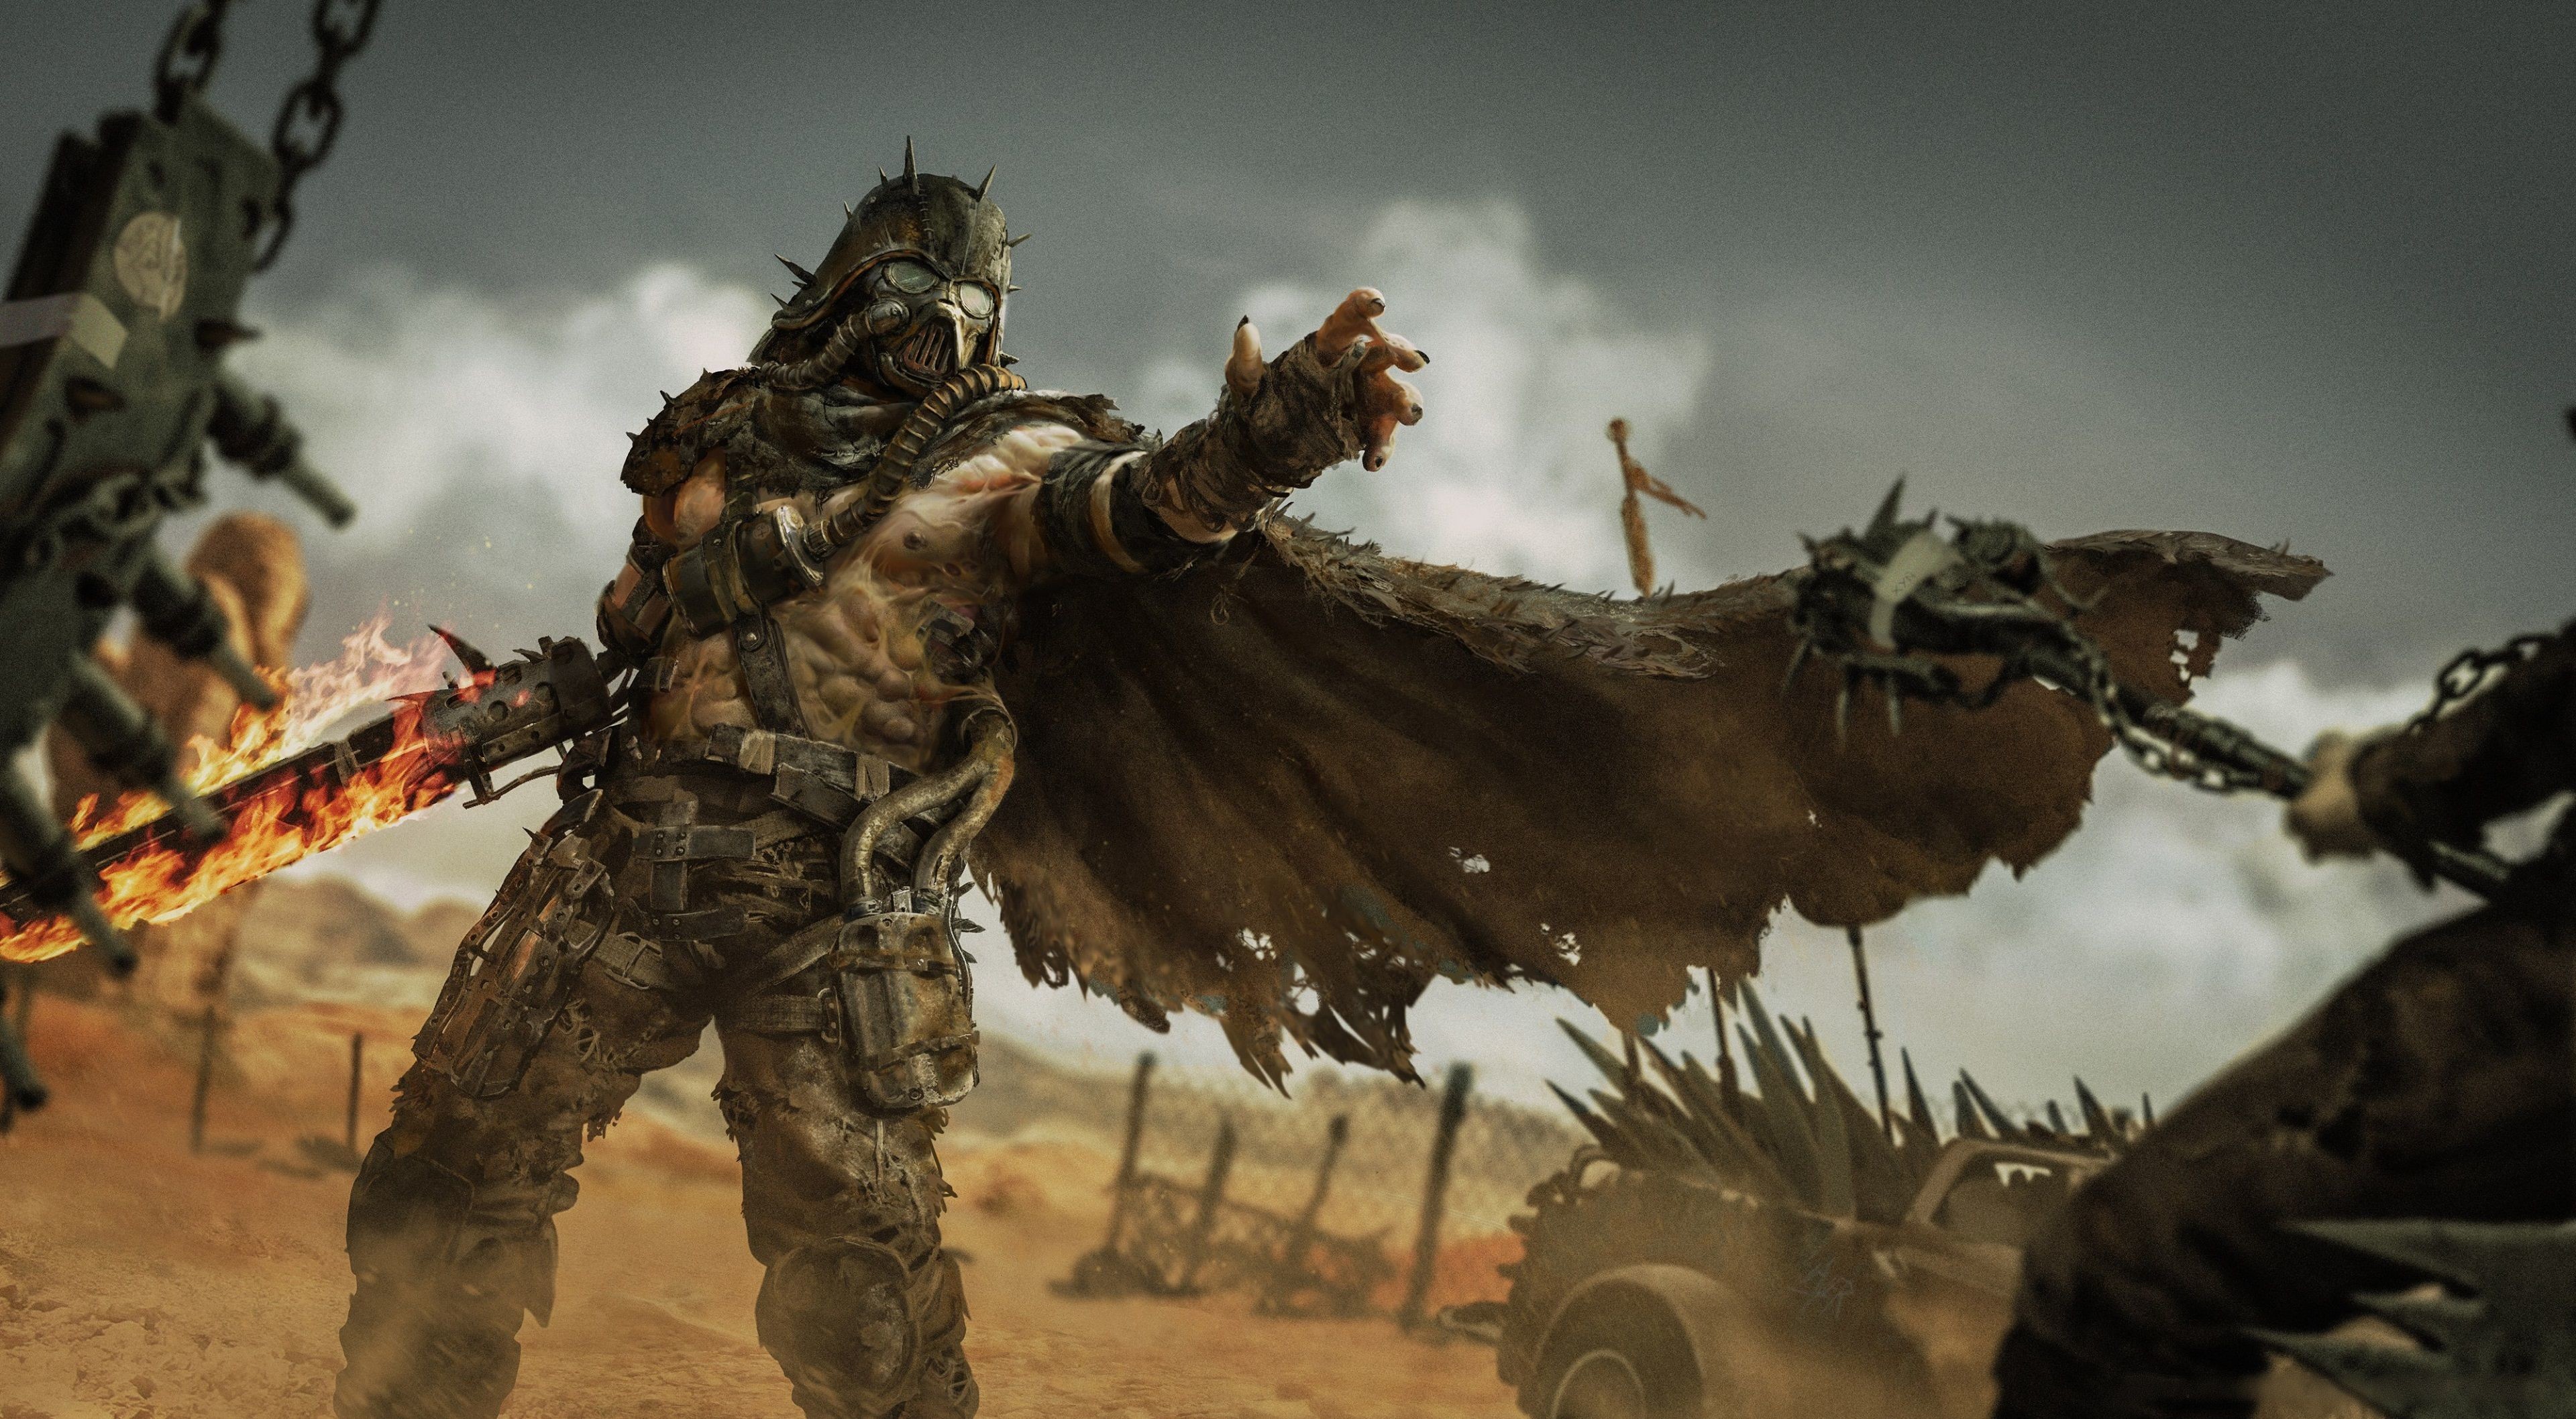 3840x2116 2048x1152 2048x1152 Mad Max 4k 2048x1152 Resolution HD 4k Wallpapers,  Images ...">